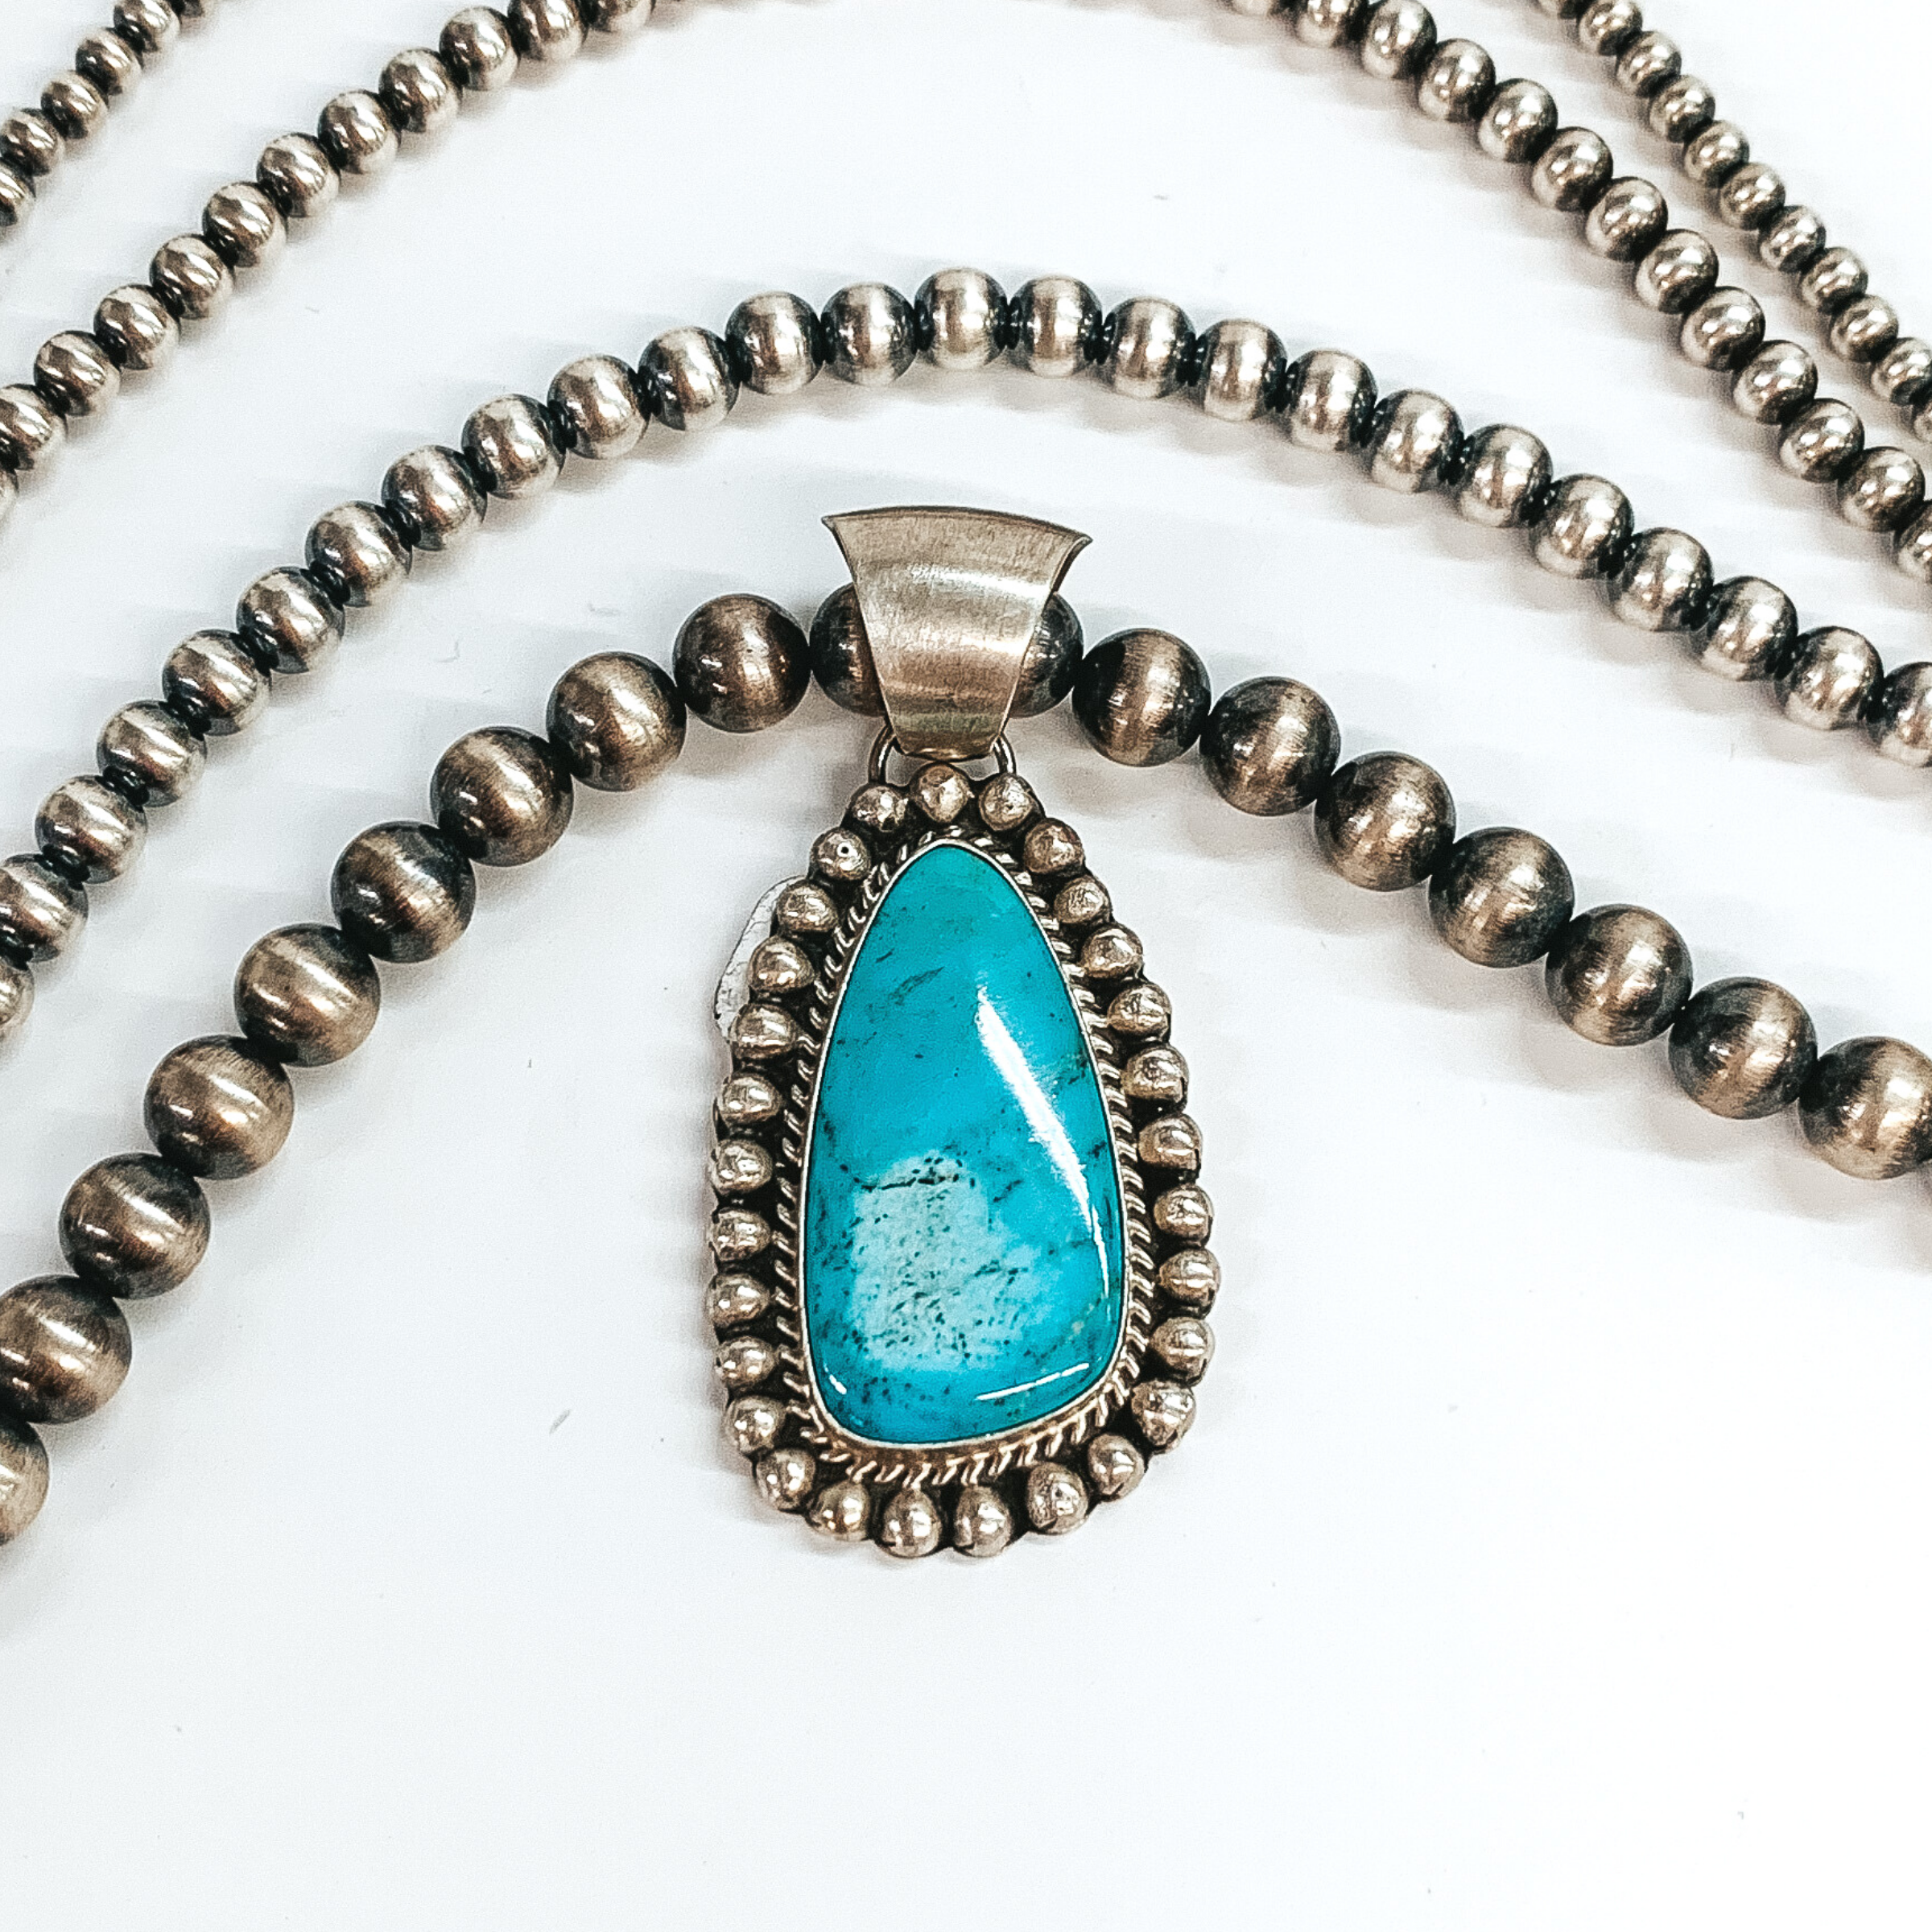 Augustine Largo | Navajo Handmade Sterling Silver Asymmetrical Pendant with Kingman Turquoise Stone - Giddy Up Glamour Boutique